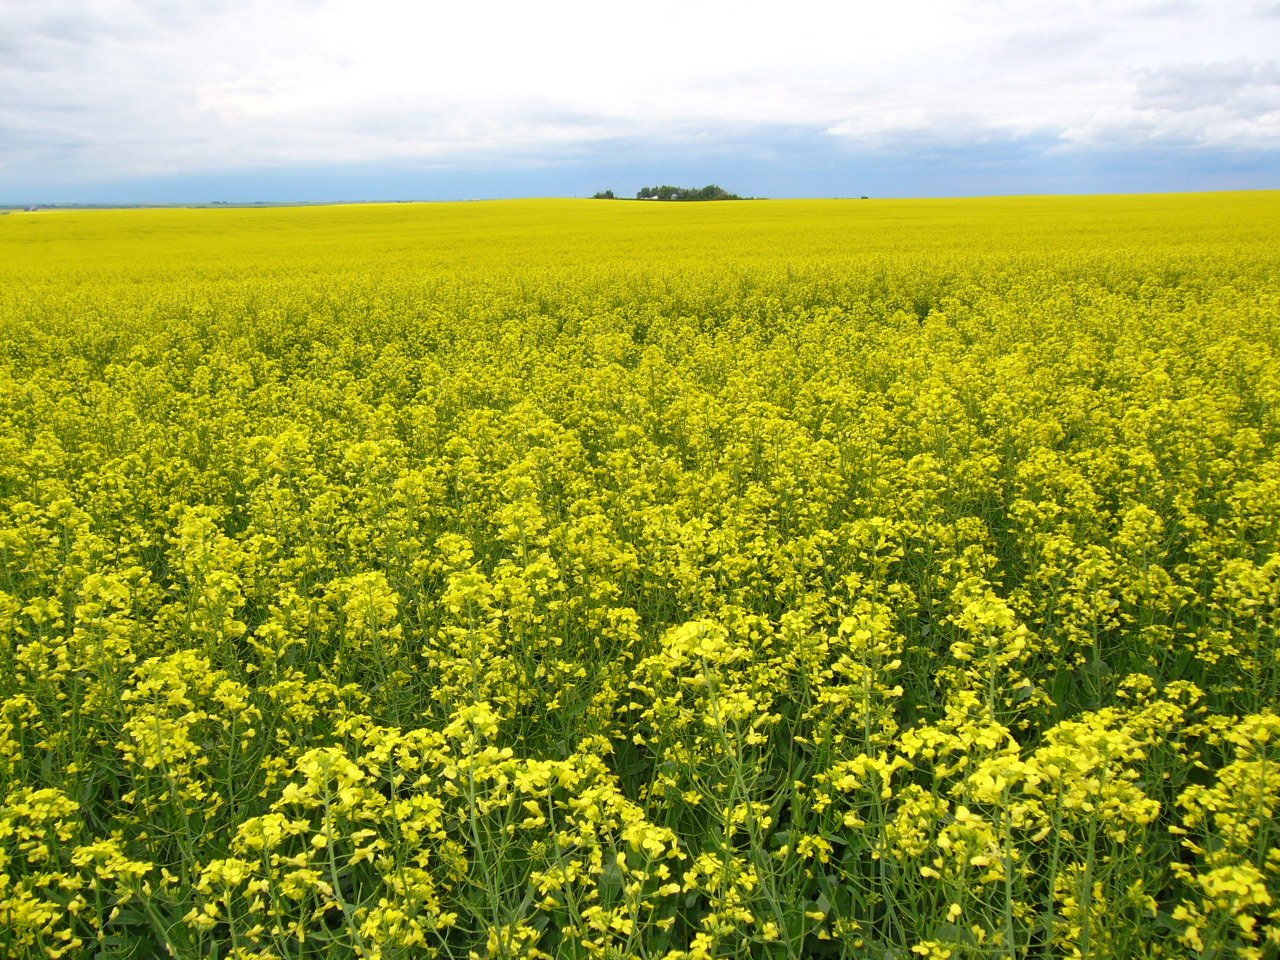 a large field of yellow flowers with an airplane flying above